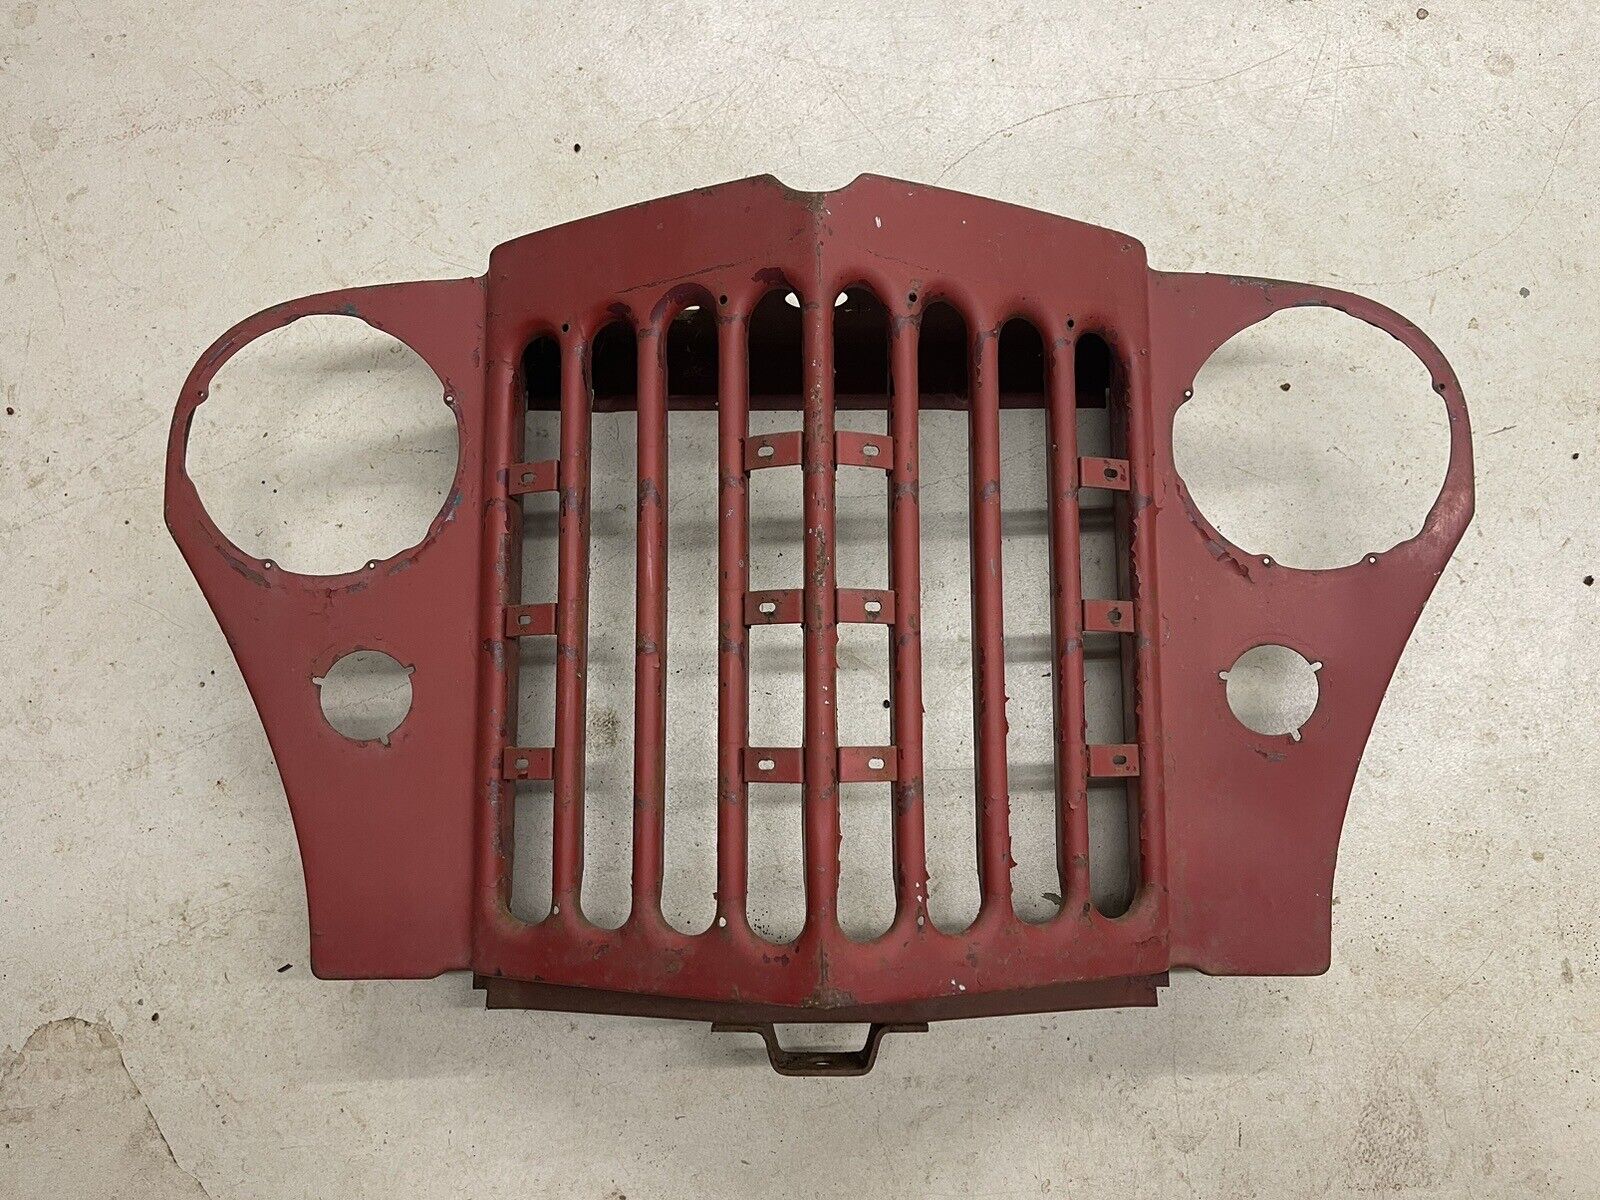 1950 1951 Willys Overland Jeepster front grill.